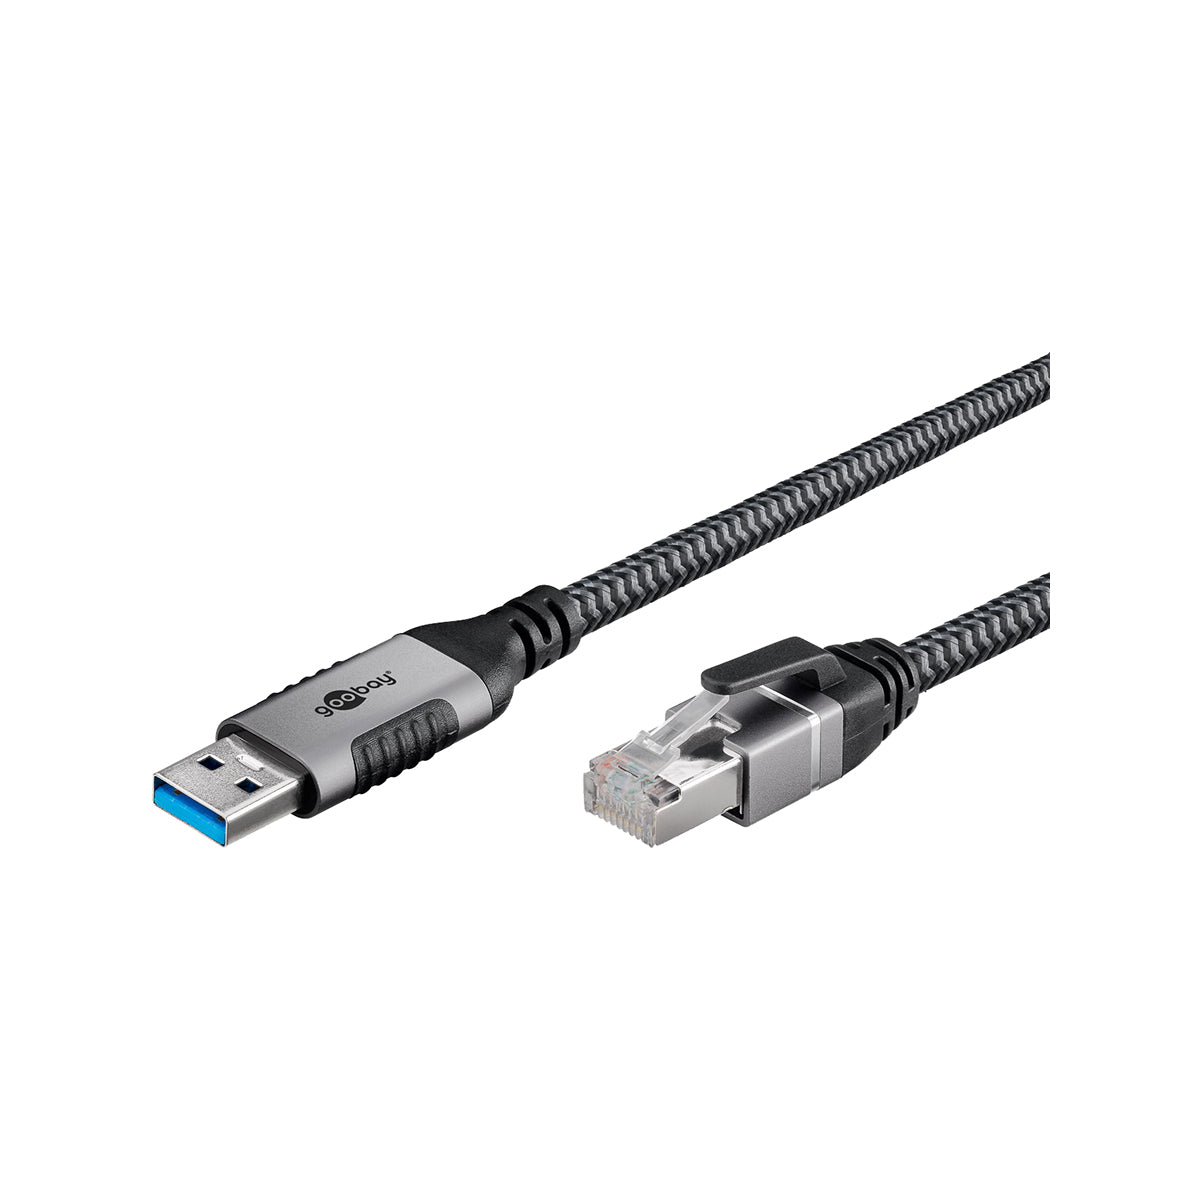 GooBay USB-A 3.0 to RJ45 Ethernet Cable 3m for PC/Laptop - Black